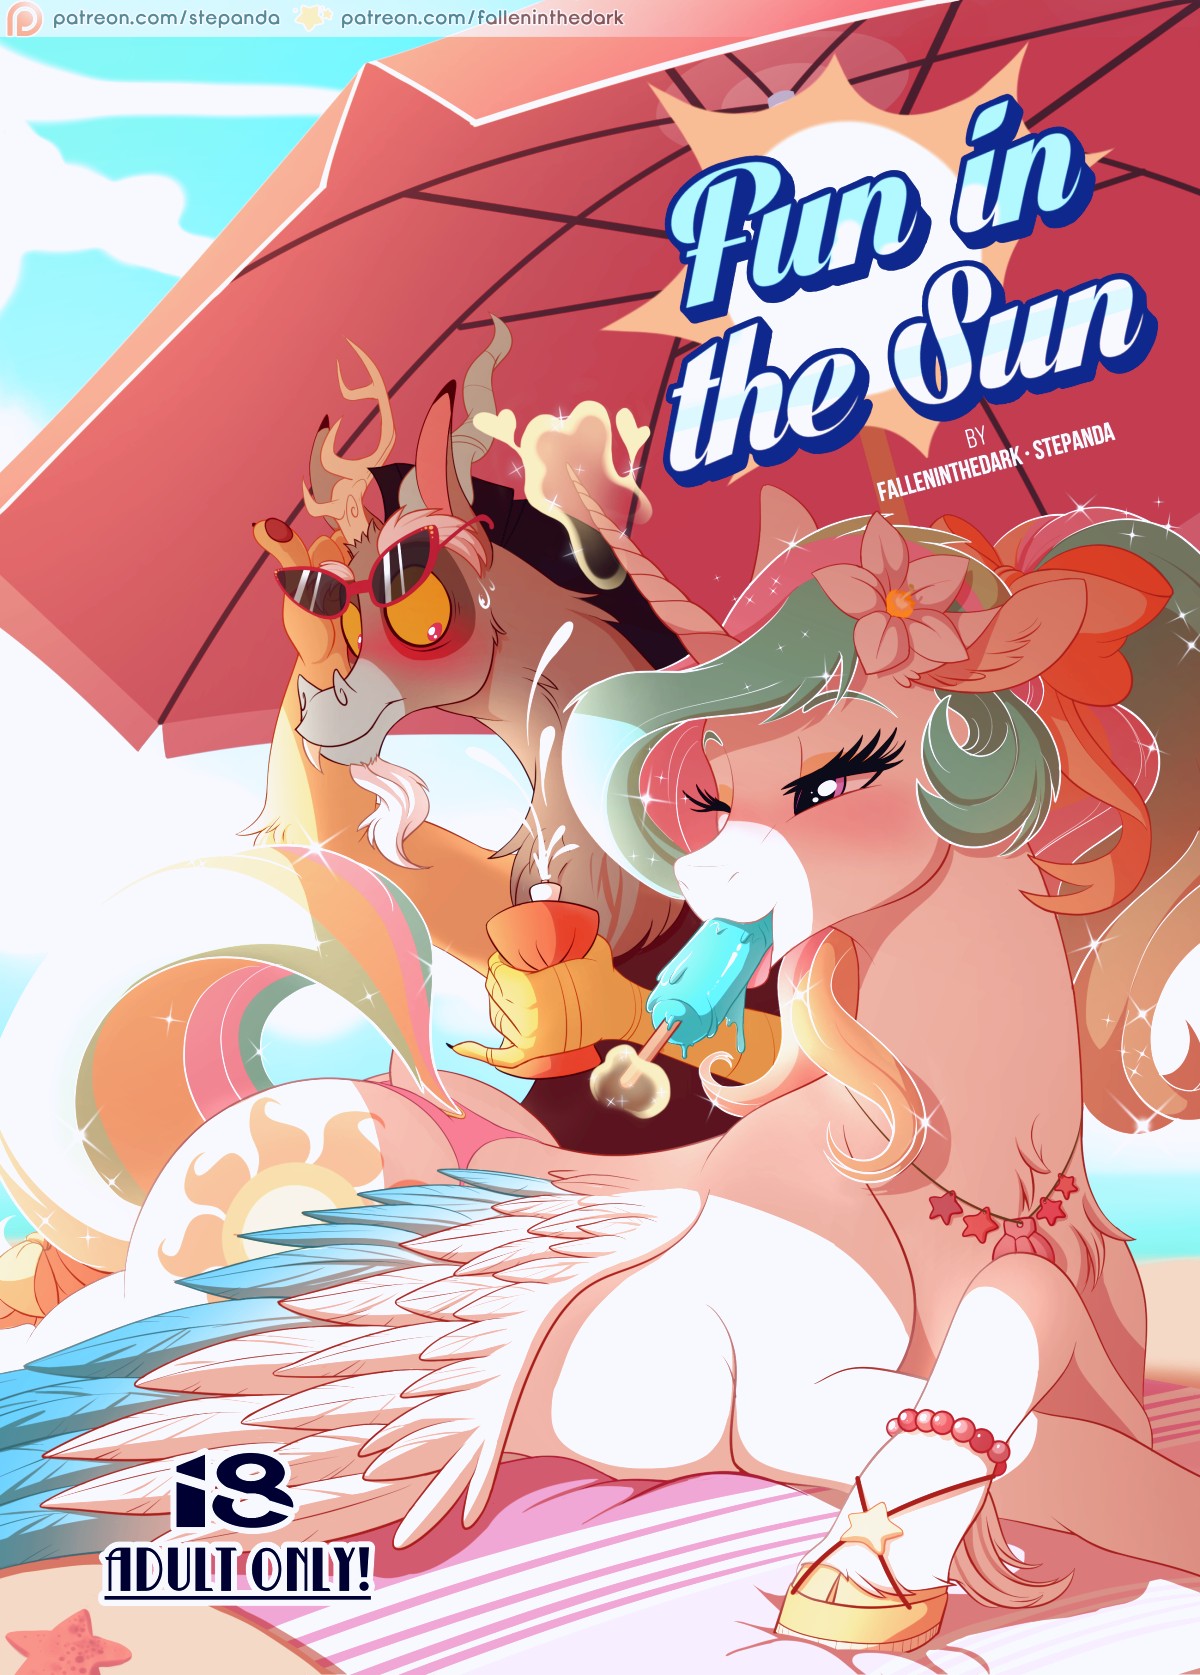 Fun in the Sun porn comic page 01 on category My Little Pony